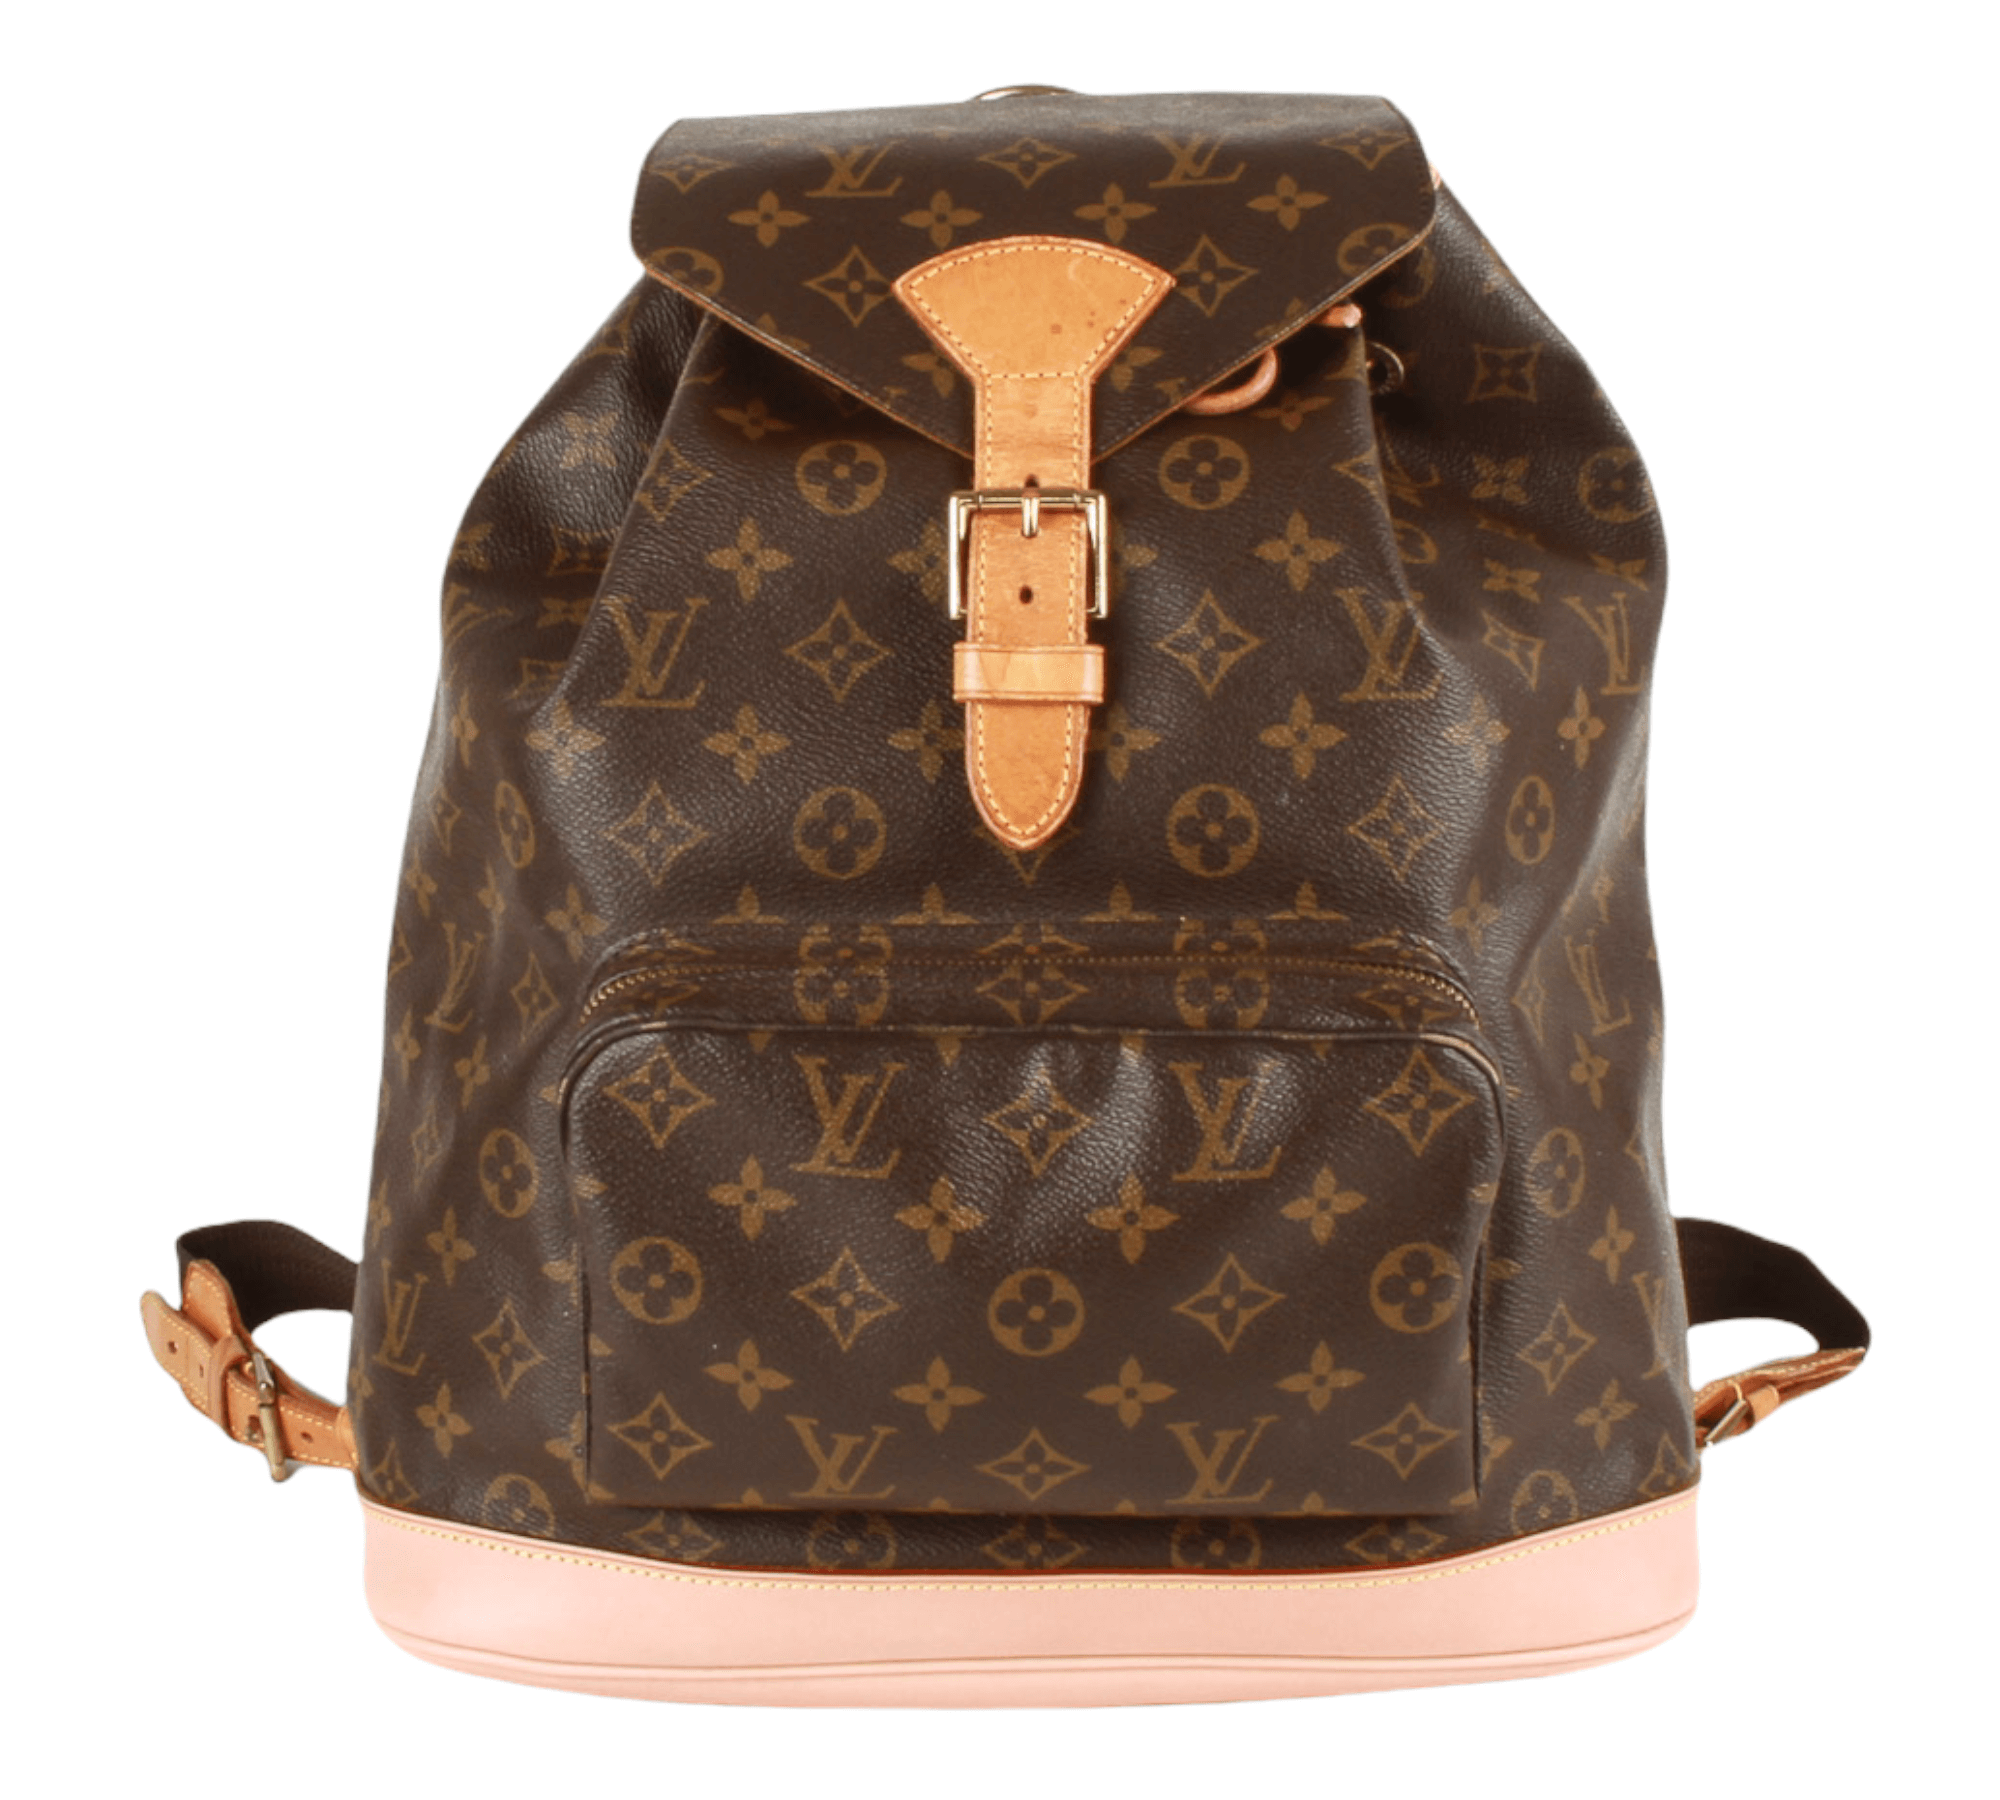 RARE AUTHENTIC Louis Vuitton Christopher Backpack Monogram RUNWAY 04  Limited  eBay